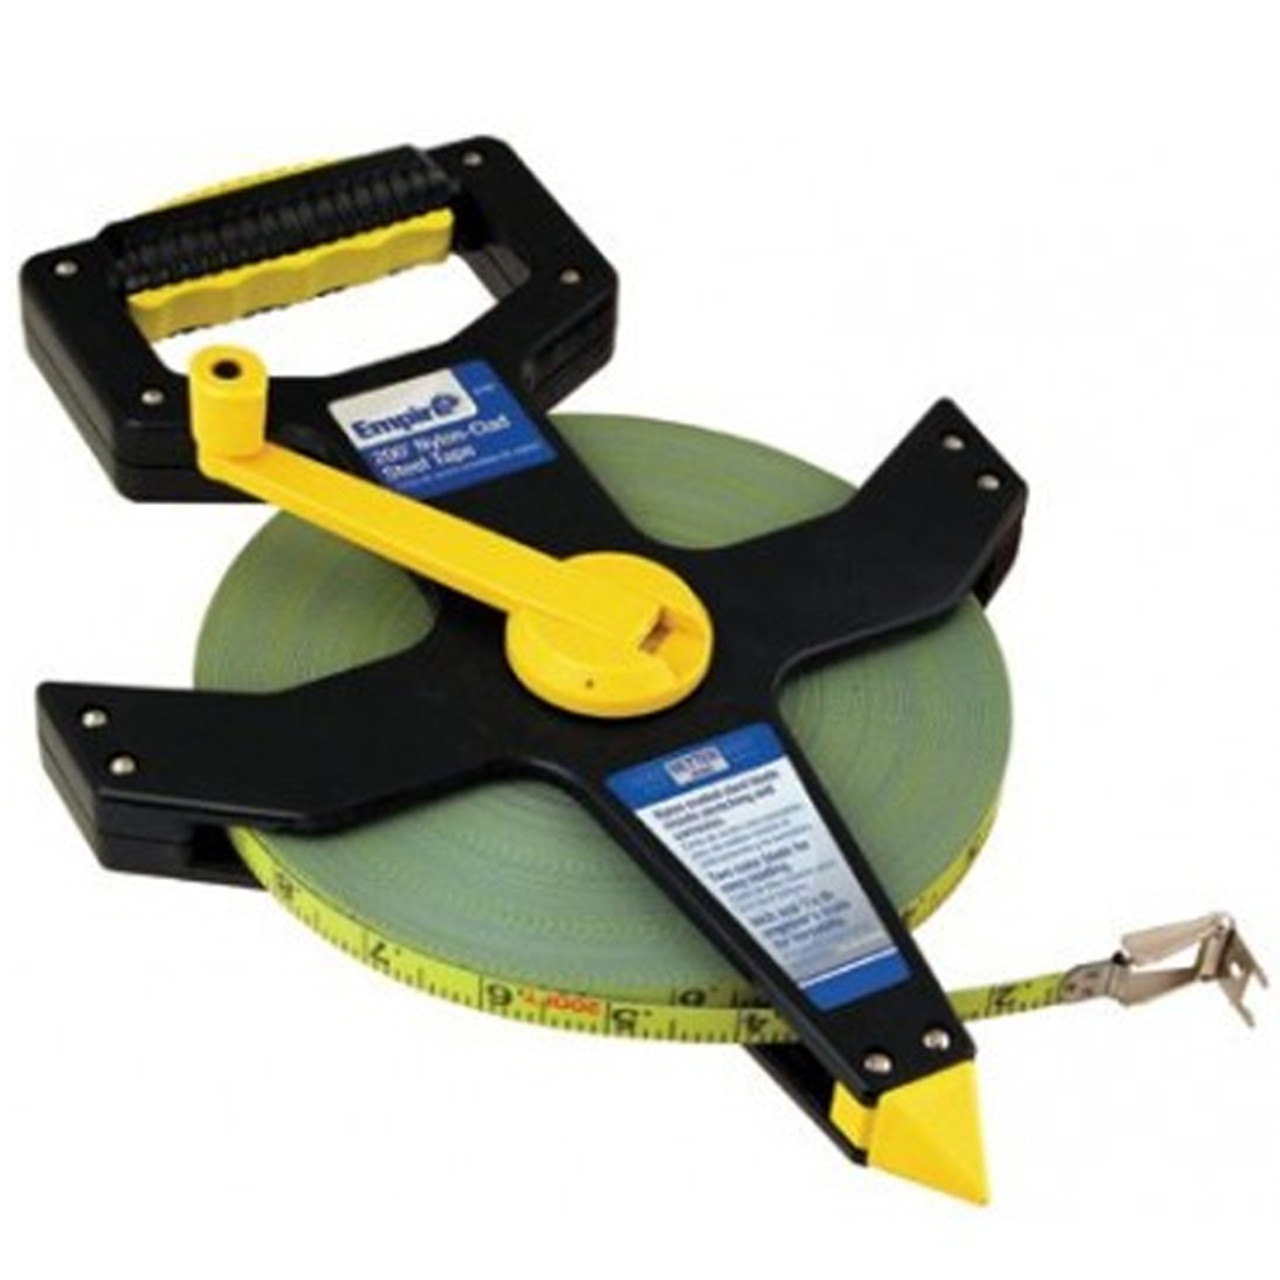 Crime Scene Tools and Forensic Analysis - Measuring Wheels - Tape